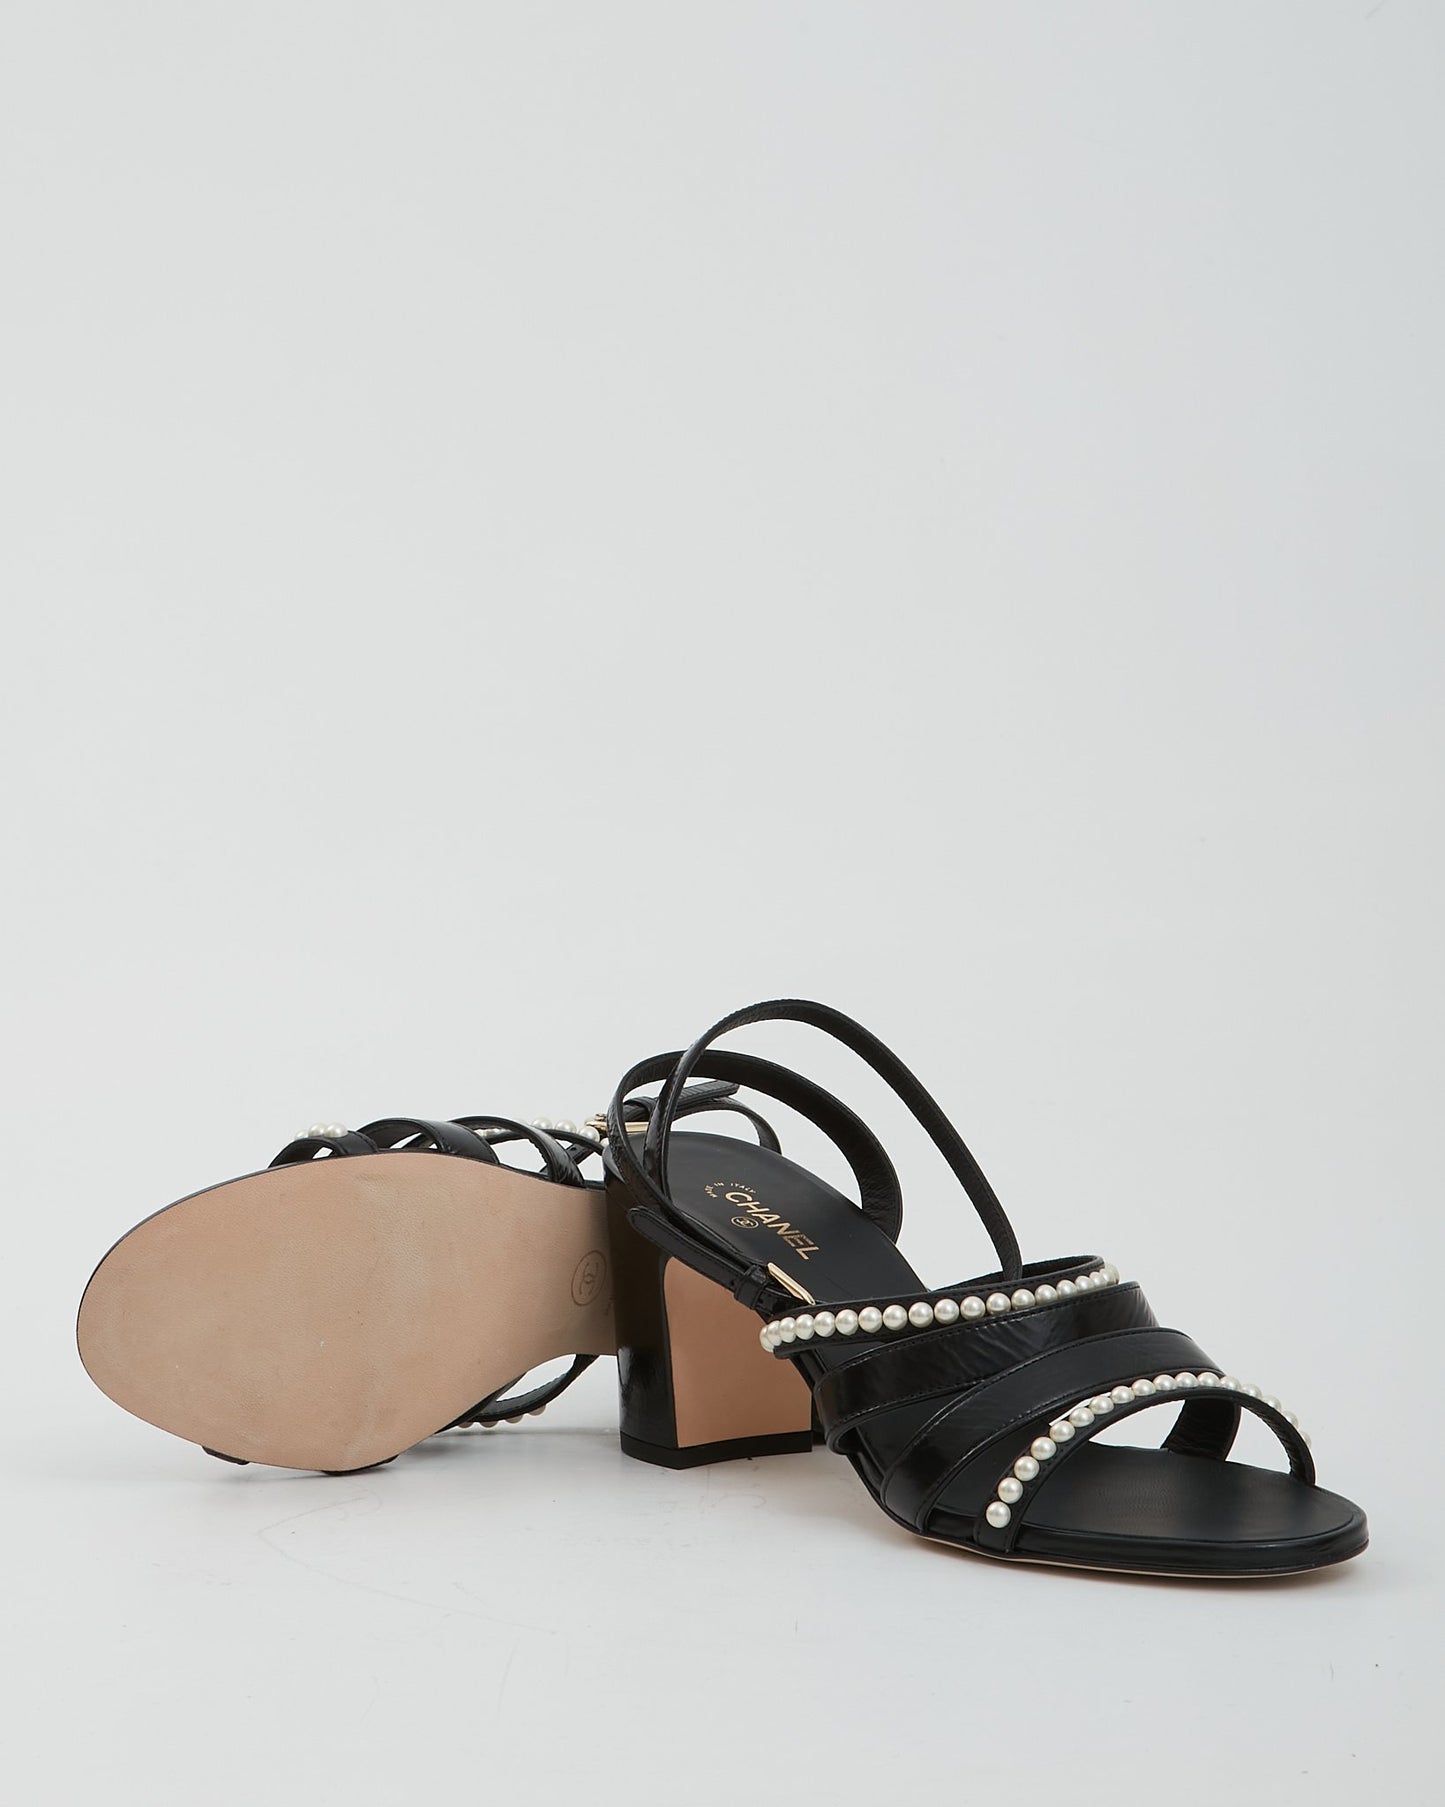 Chanel Black Leather With Pearls Strap Sandal Heel - 39.5